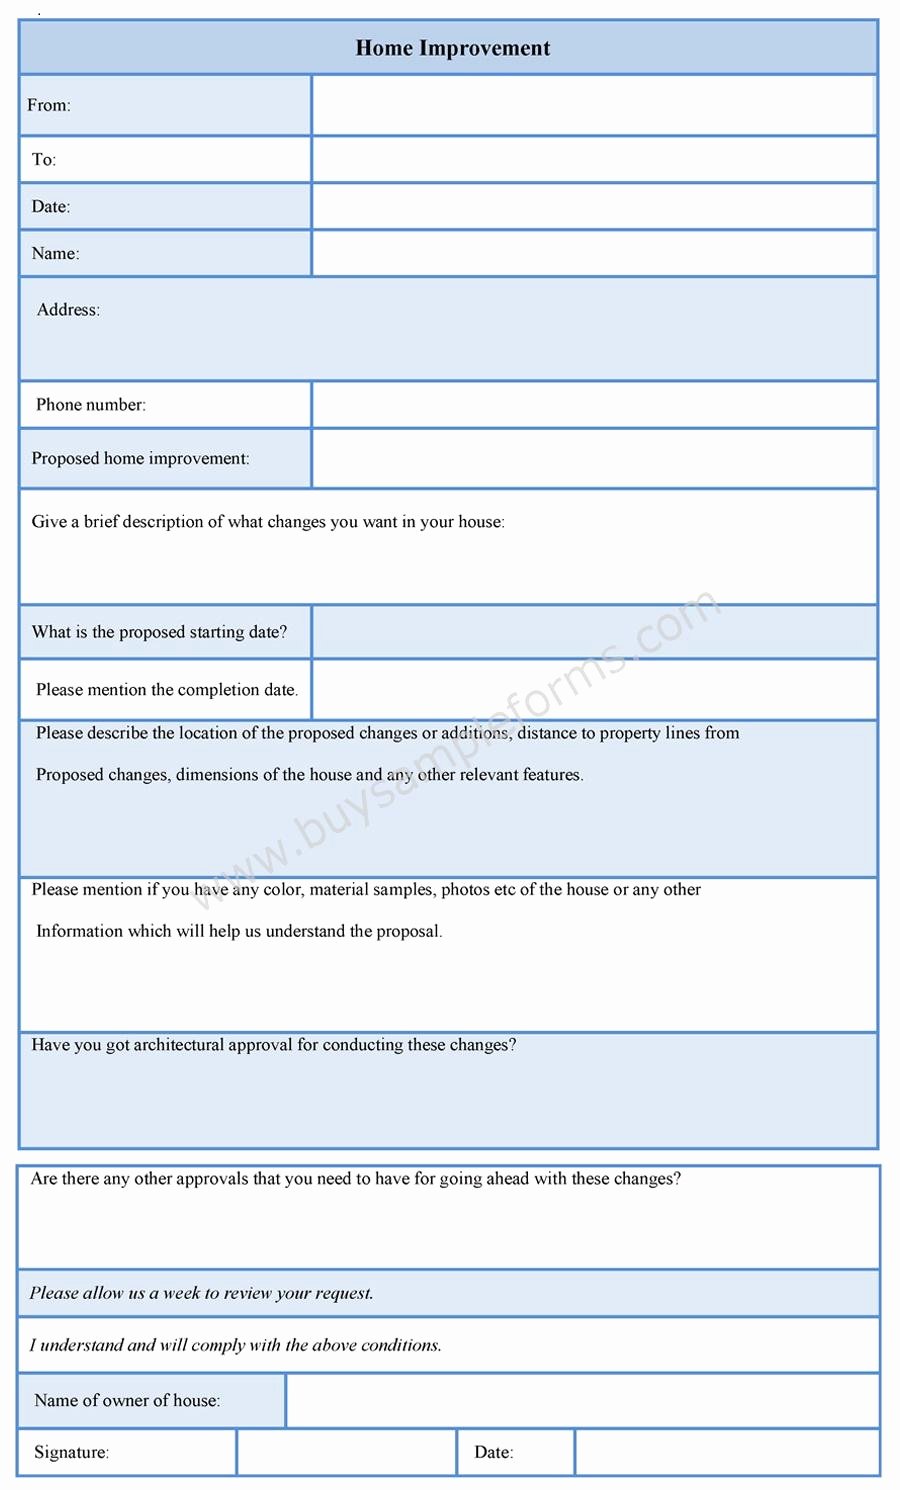 Home Repair Contract Template Inspirational Home Improvement form